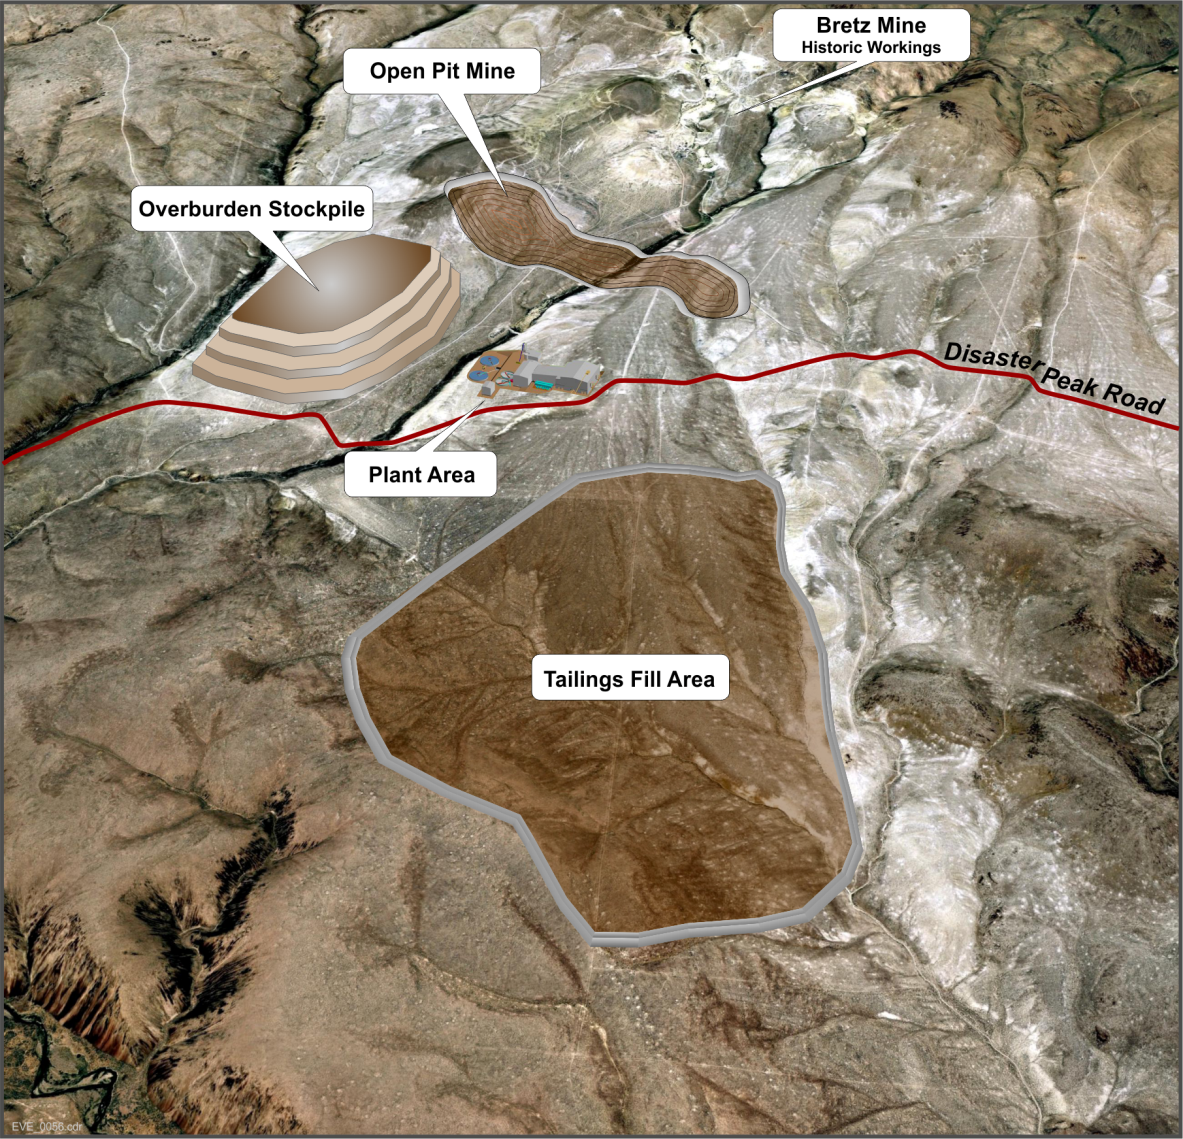 A rendered map showing a historical conceptual uranium mine layout